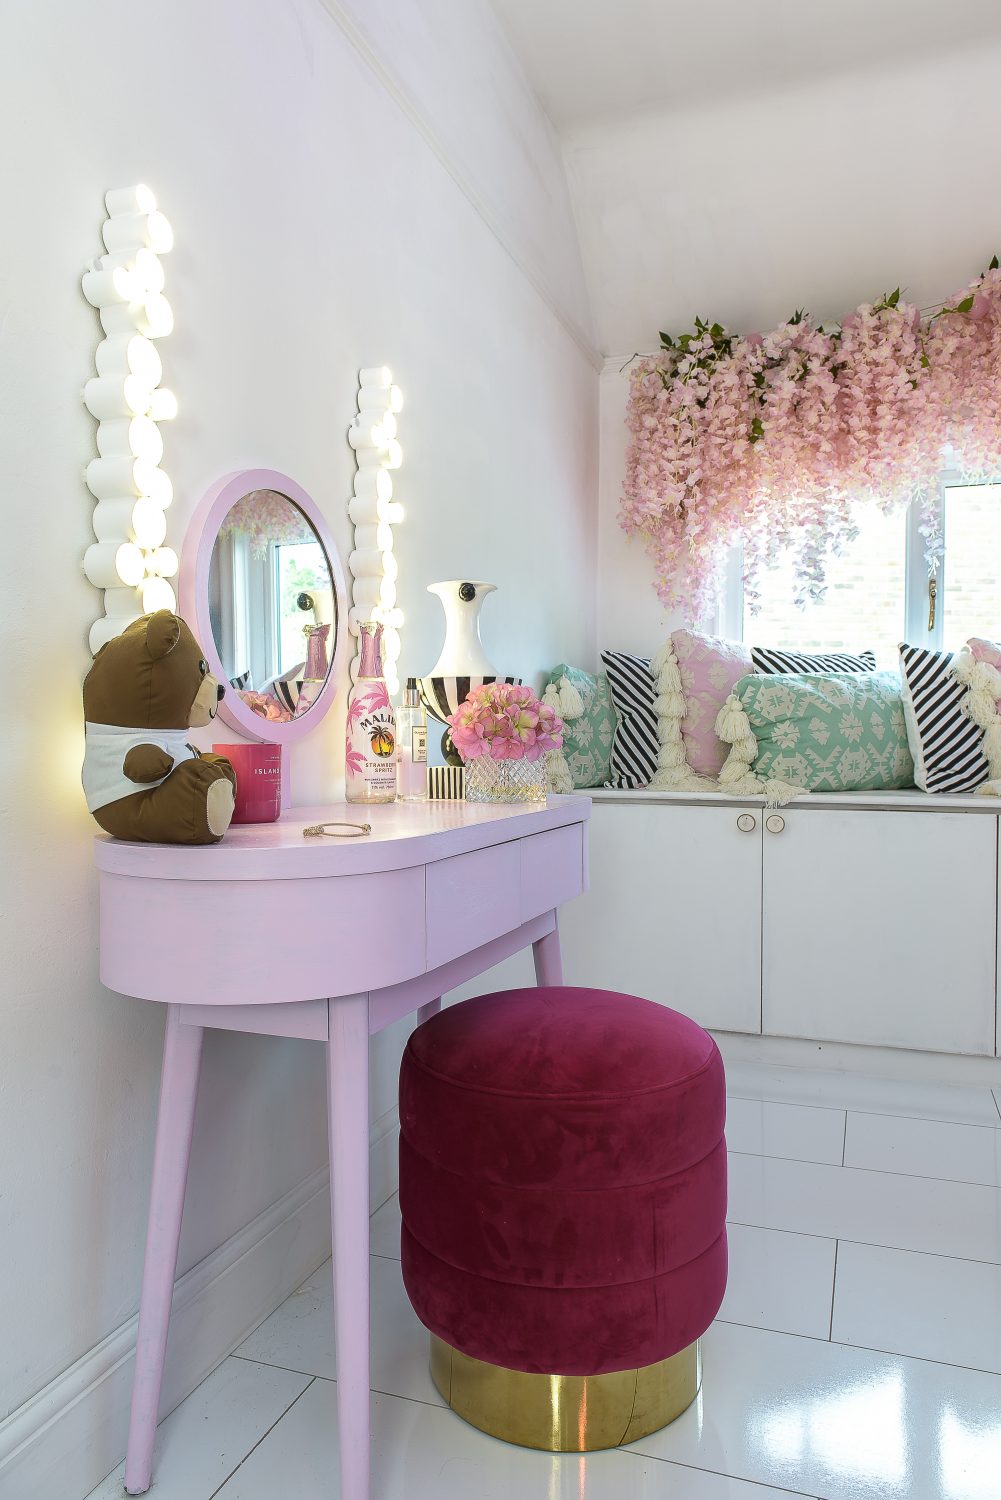 Cat’s youngest daughter’s bedroom has been her most recent project. With a brass four-poster bed and a wall of pink silk flowers, she chose the room’s decor inspired by the interiors of MaMa Kelly’s pink restaurant in Amsterdam and the Peggy Porschen cake parlour